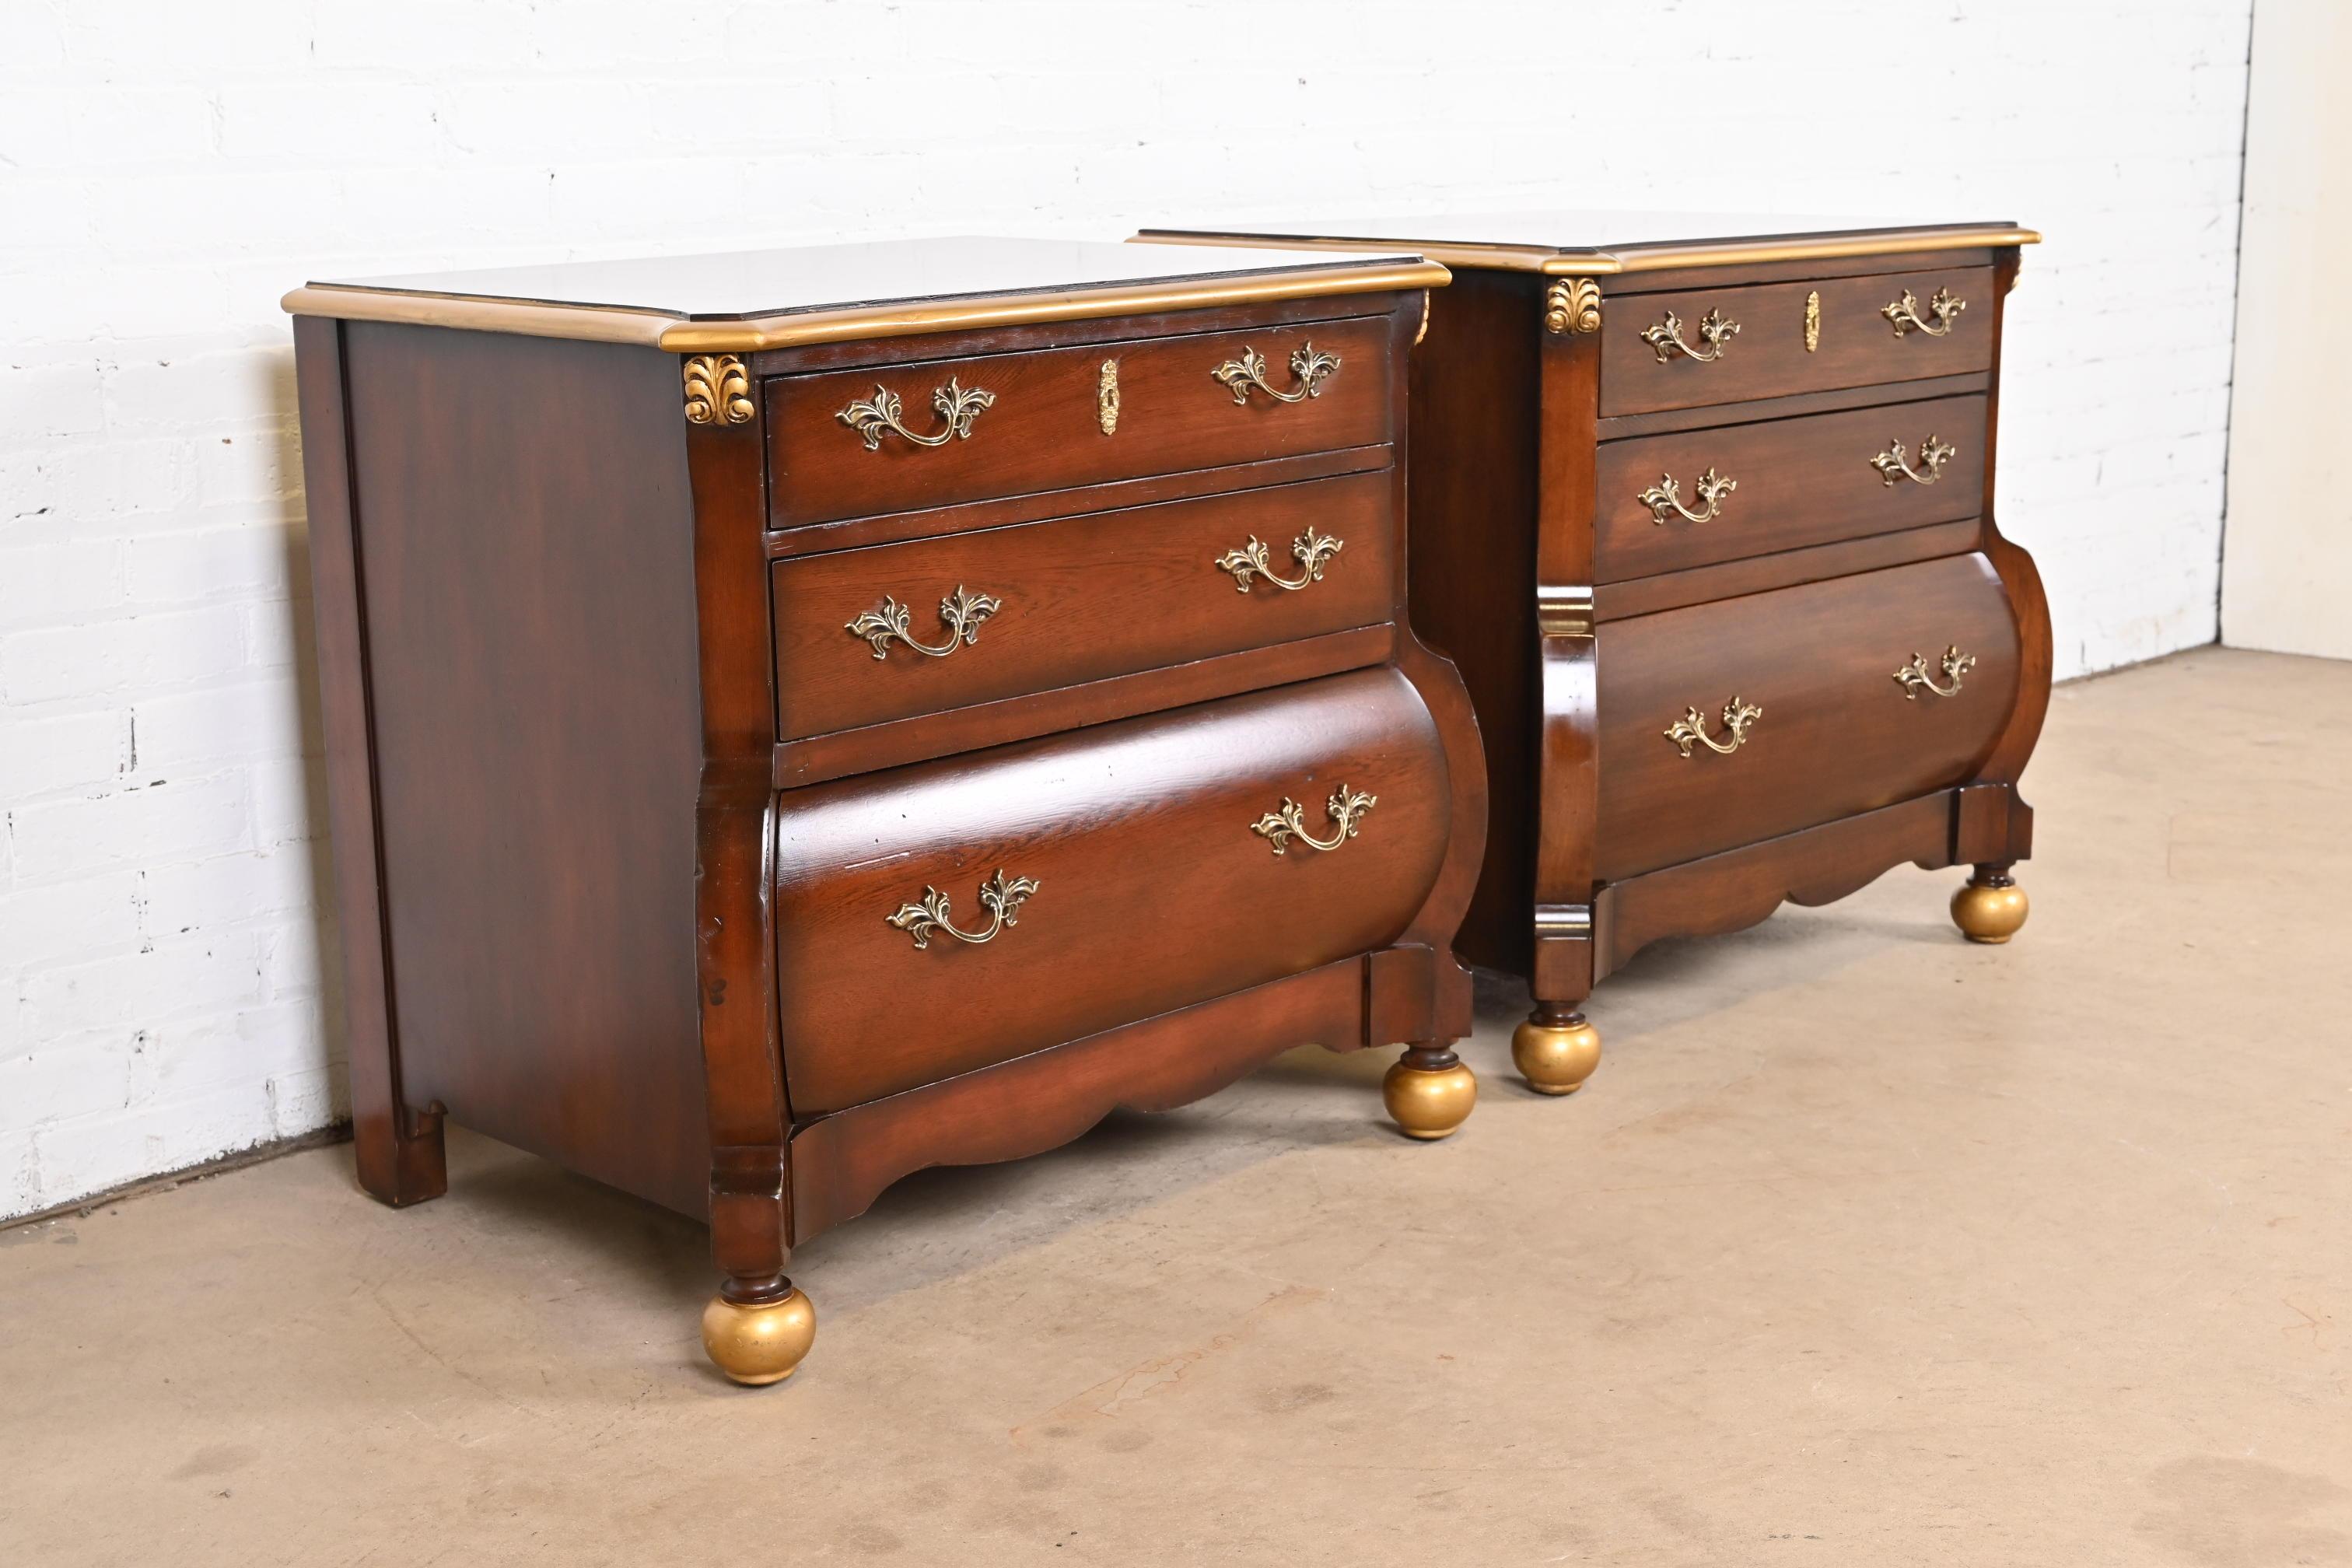 20th Century Ralph Lauren Italian Louis XV Mahogany Bombay Form Bedside Chests, Pair For Sale